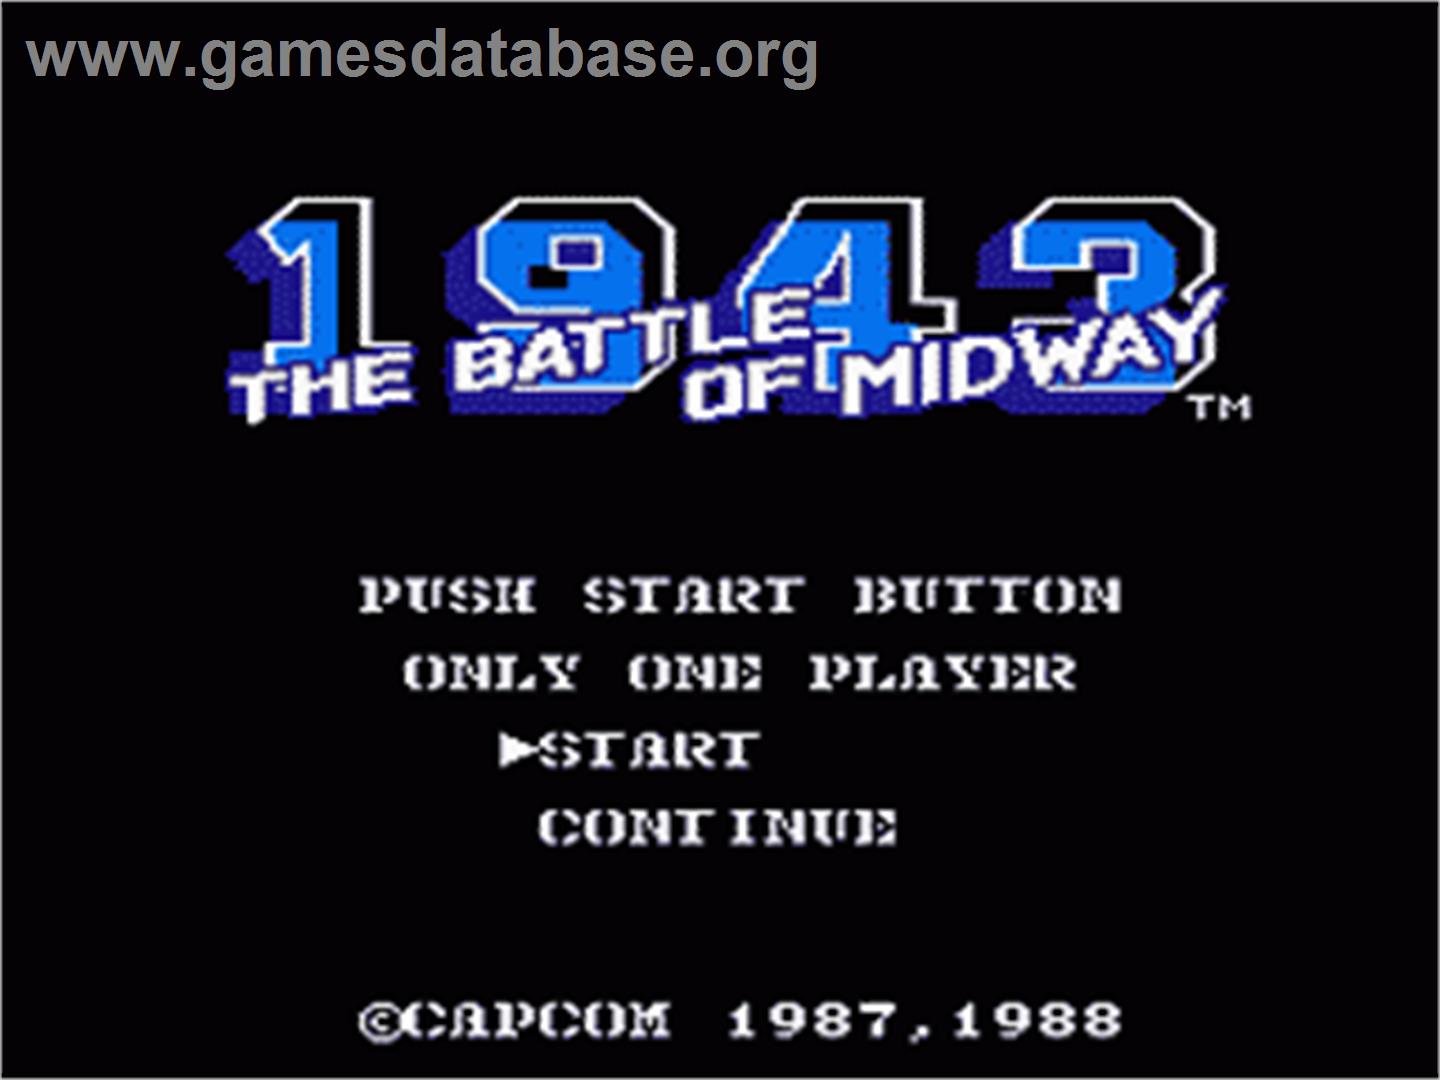 1943: The Battle of Midway - Nintendo NES - Artwork - Title Screen